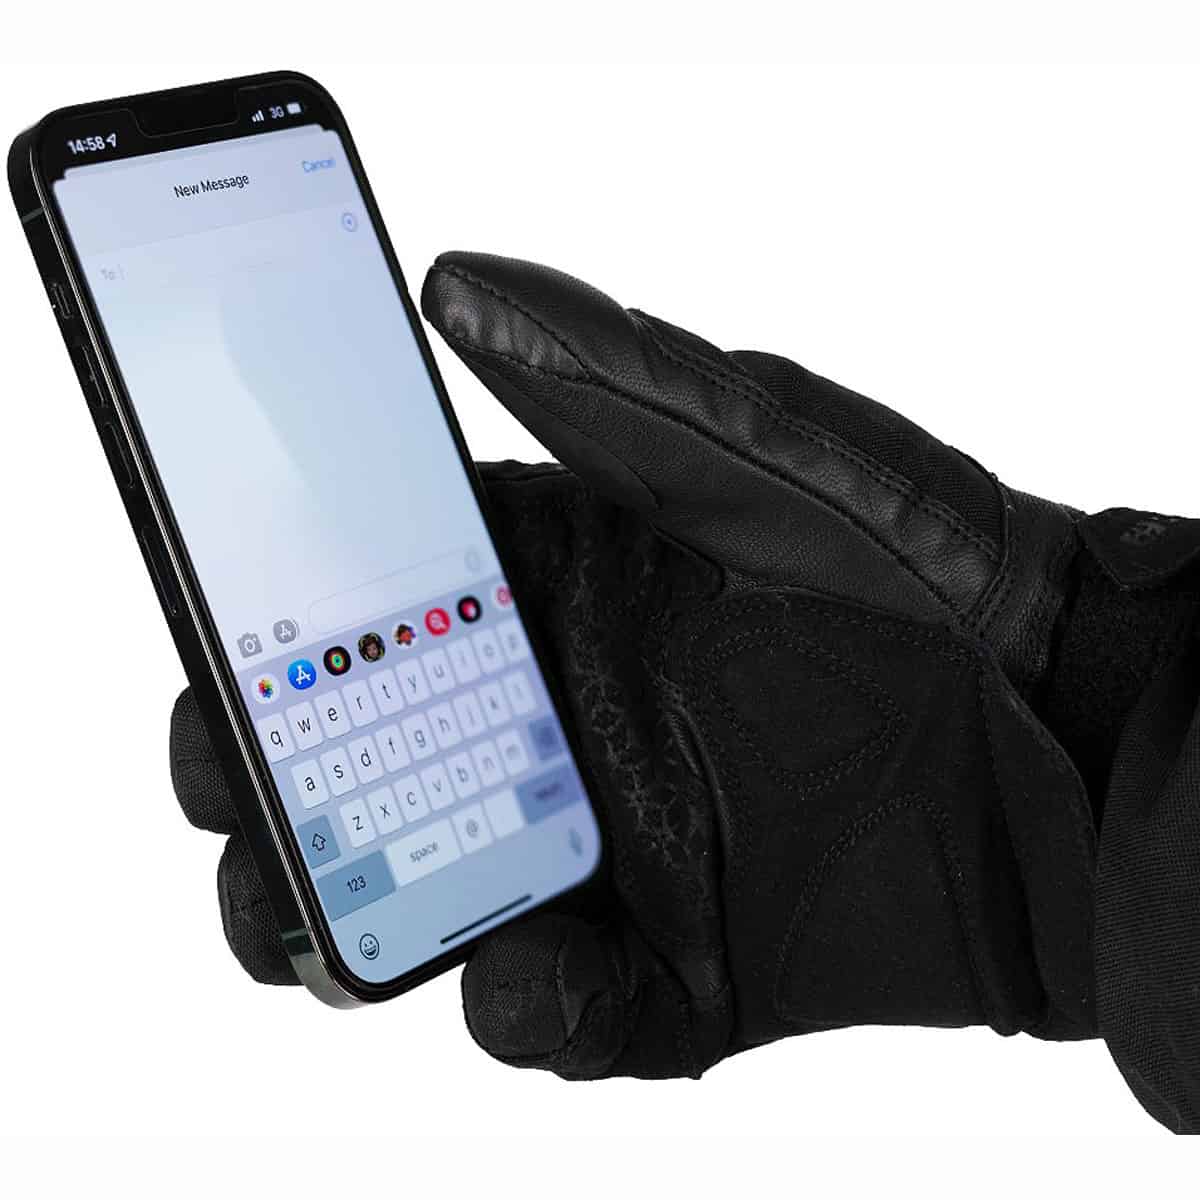 The Oxford Smart Fingers are the perfect solution to use your phone while keeping your favourite gloves on.